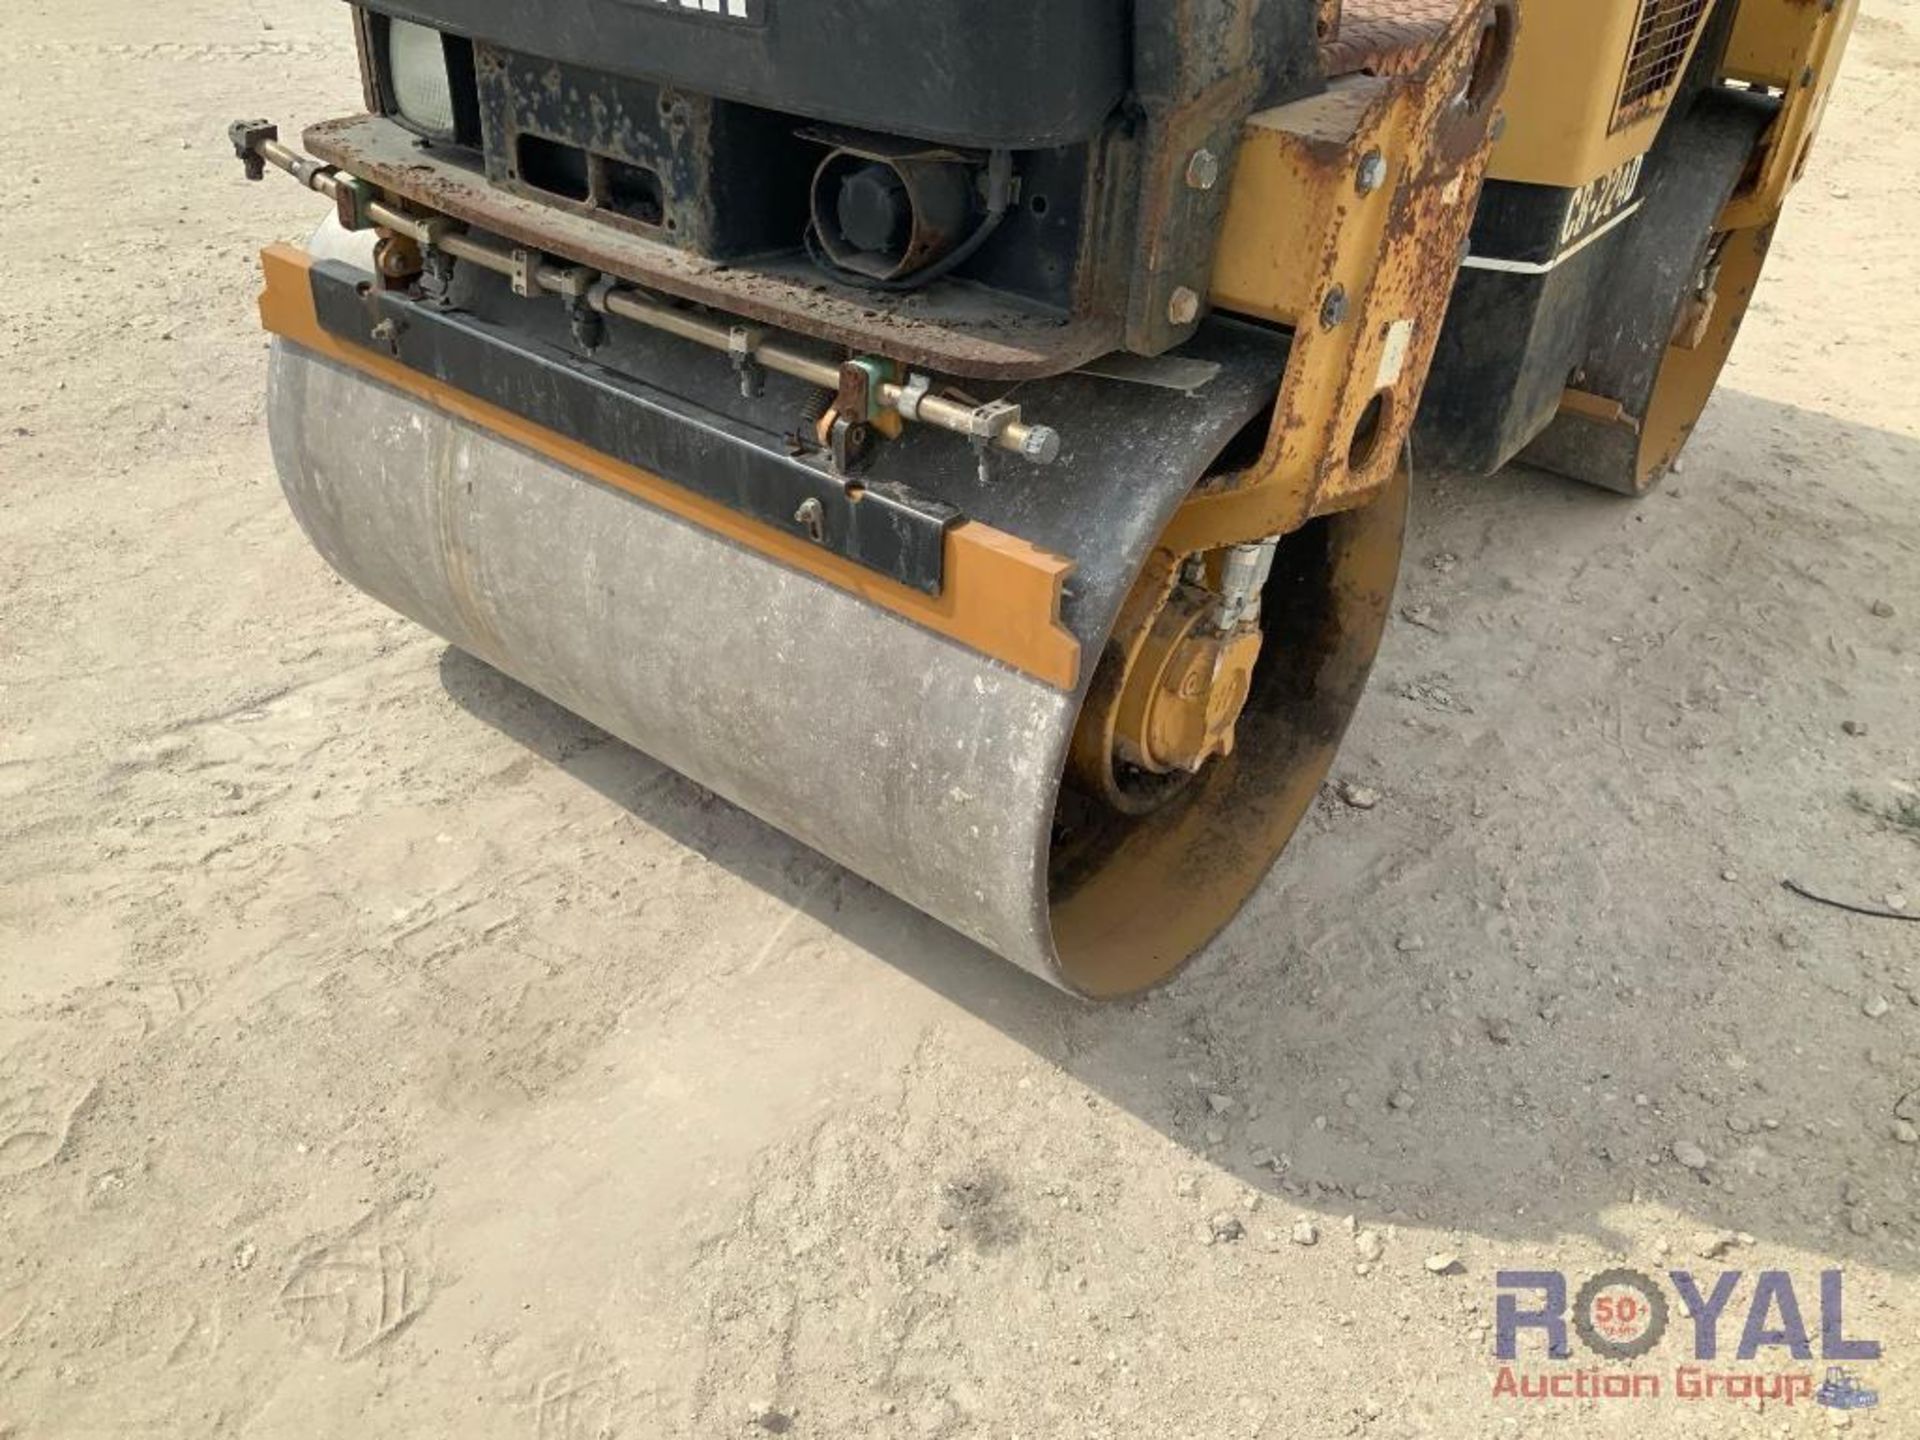 2003 Caterpillar CB224D 47 Inch Double Drum Roller - Image 17 of 19